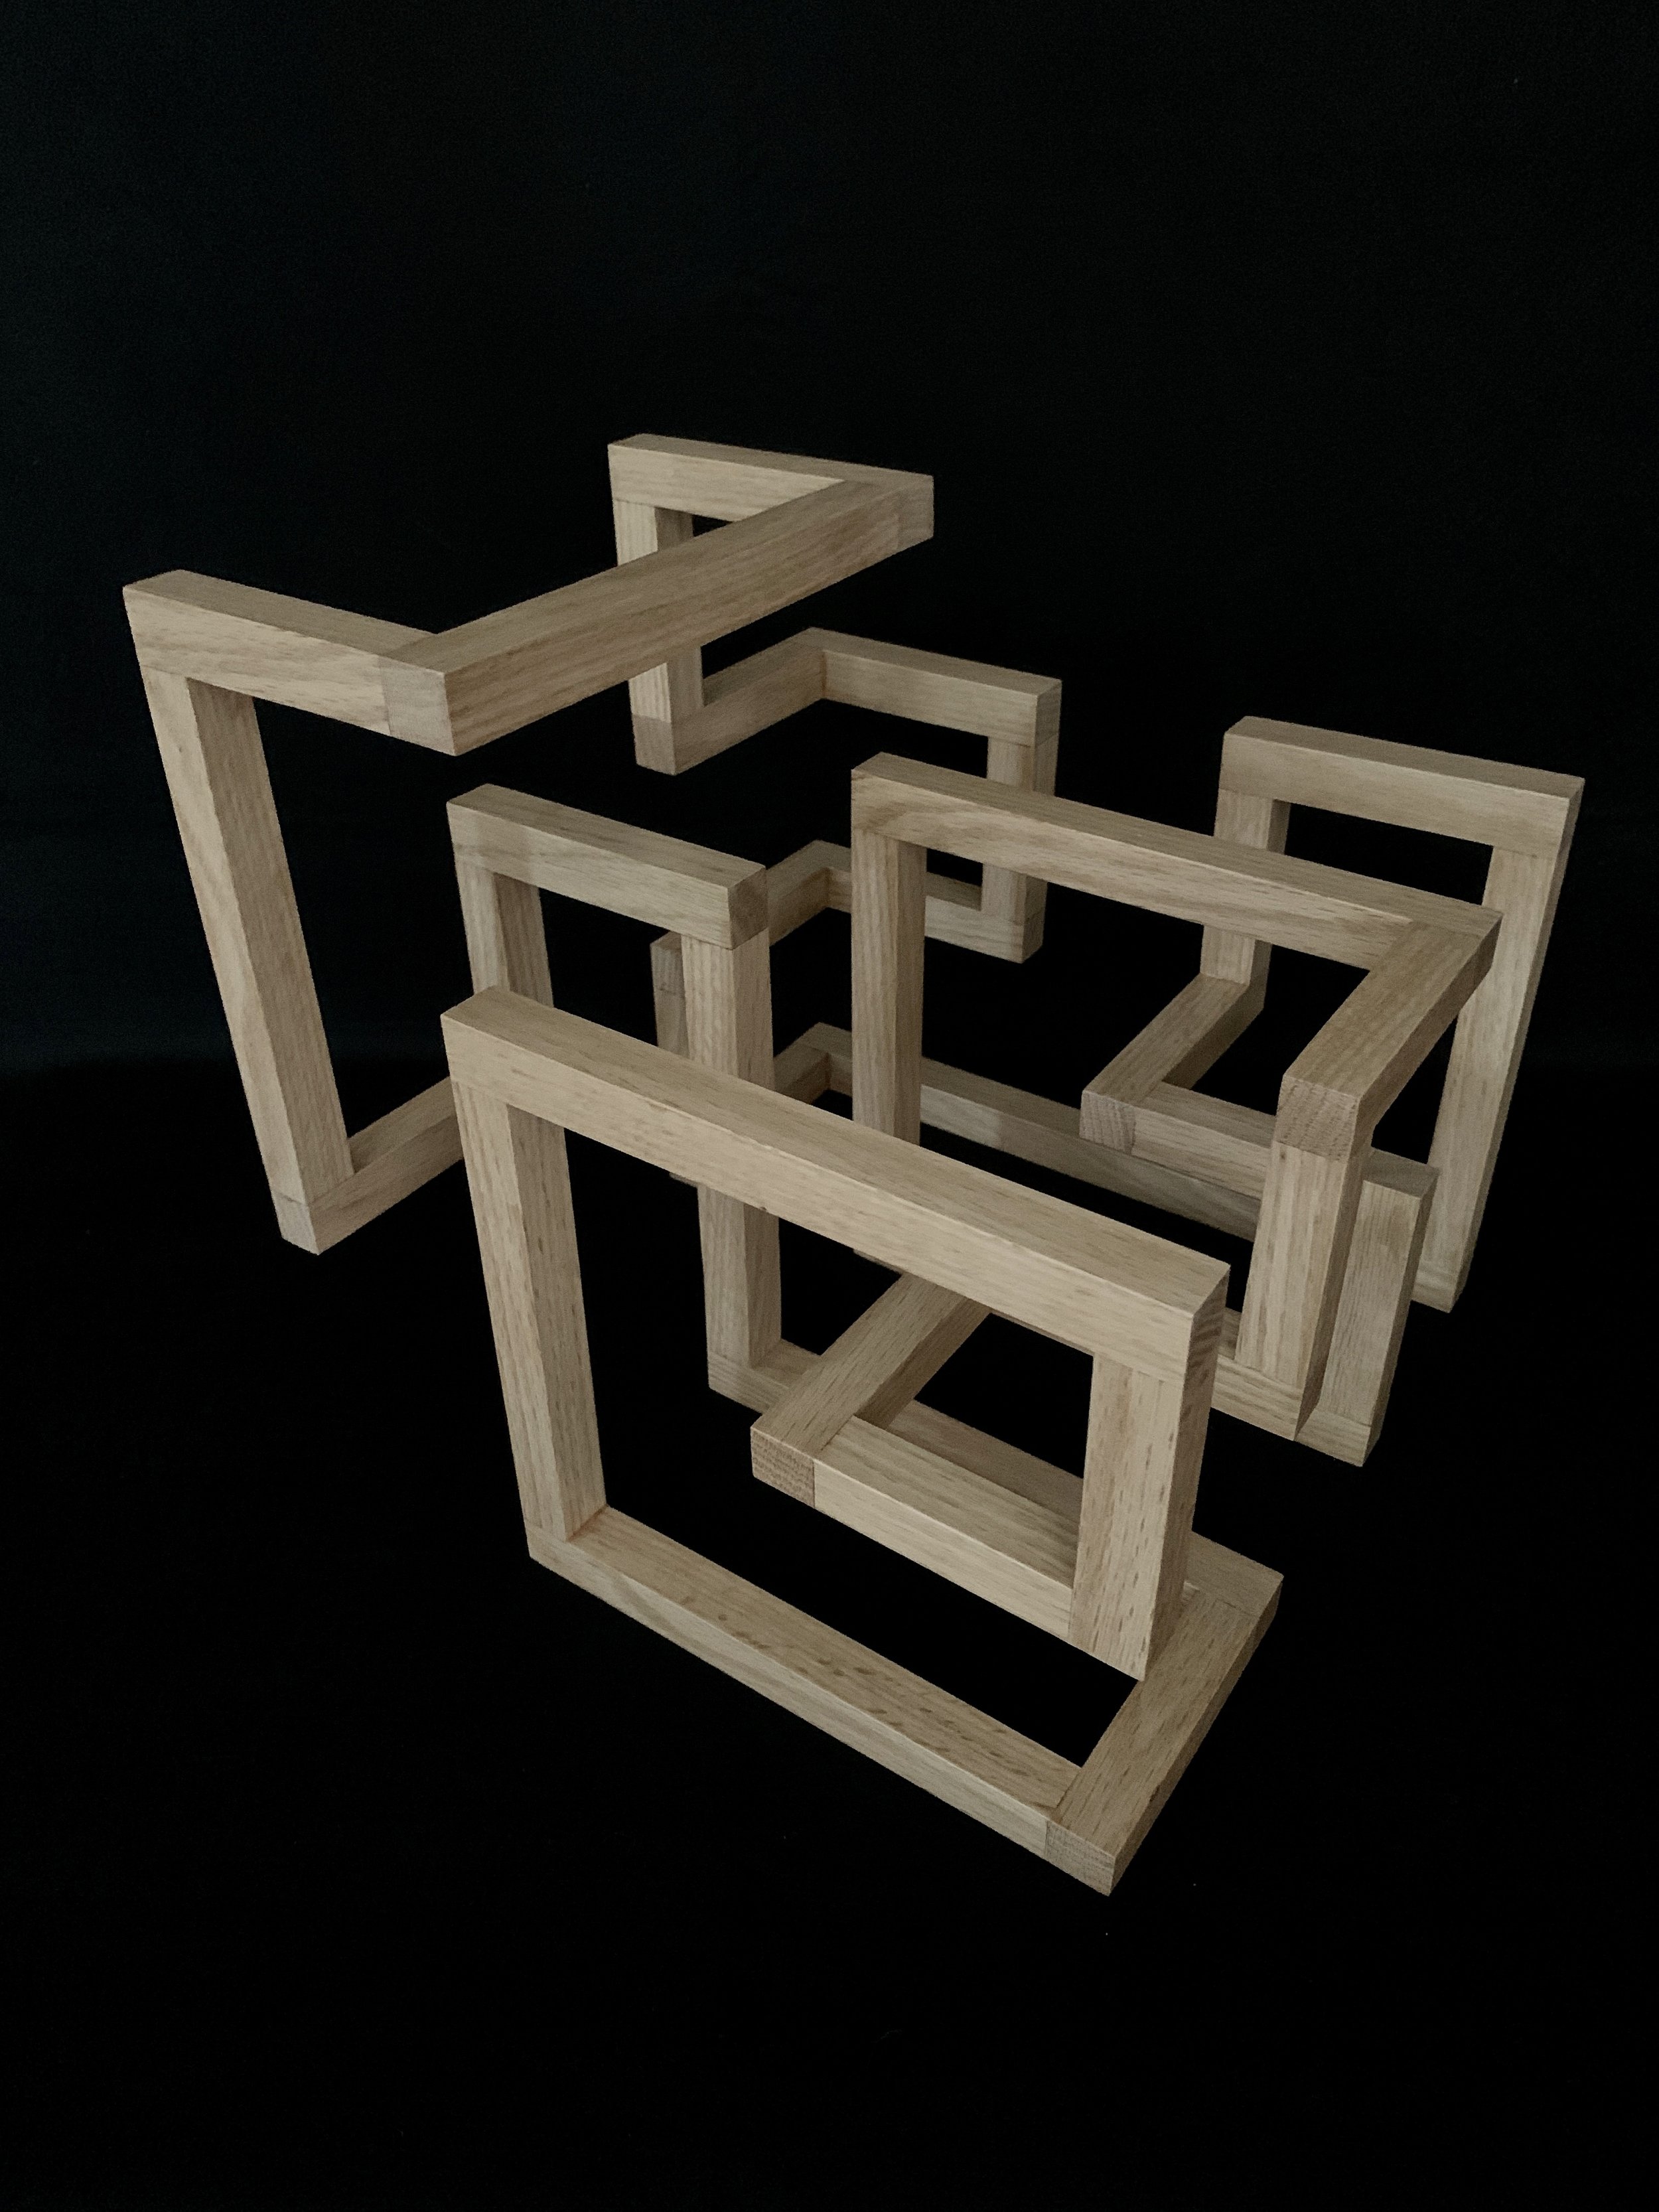 Structure_1 (Model)